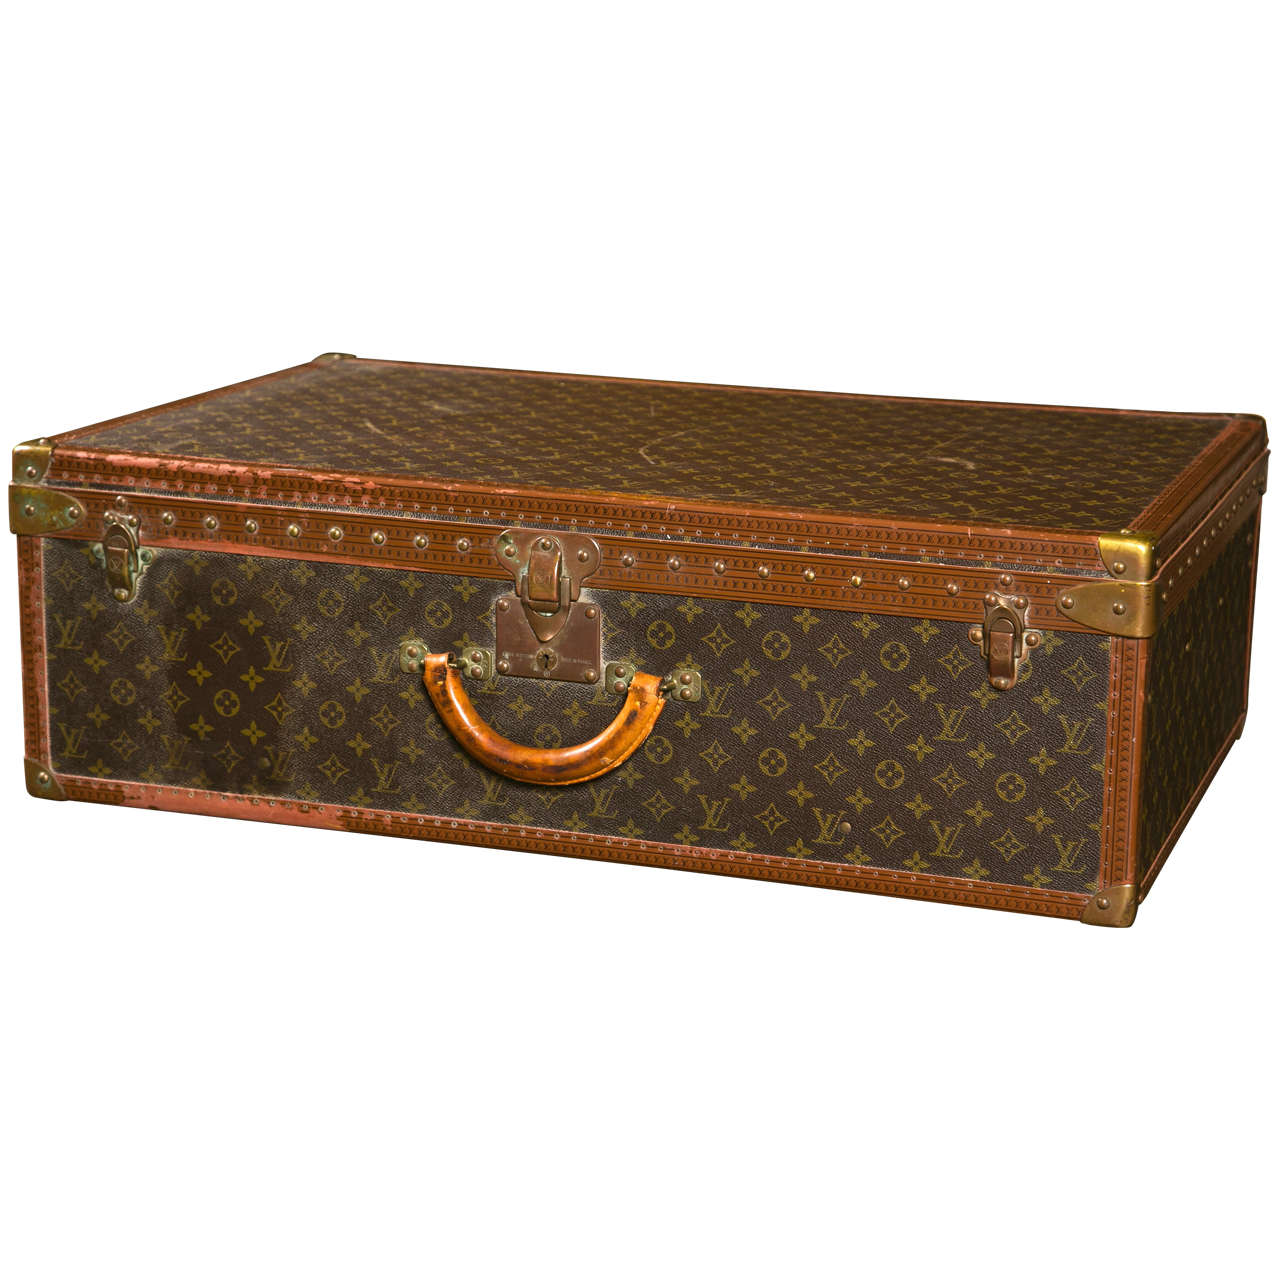 Vintage Louis Vuitton hard sided traveling case, c. 1960-70 at 1stDibs   vintage louis vuitton case, louis vuitton hard case luggage, louis vuitton  hardsided